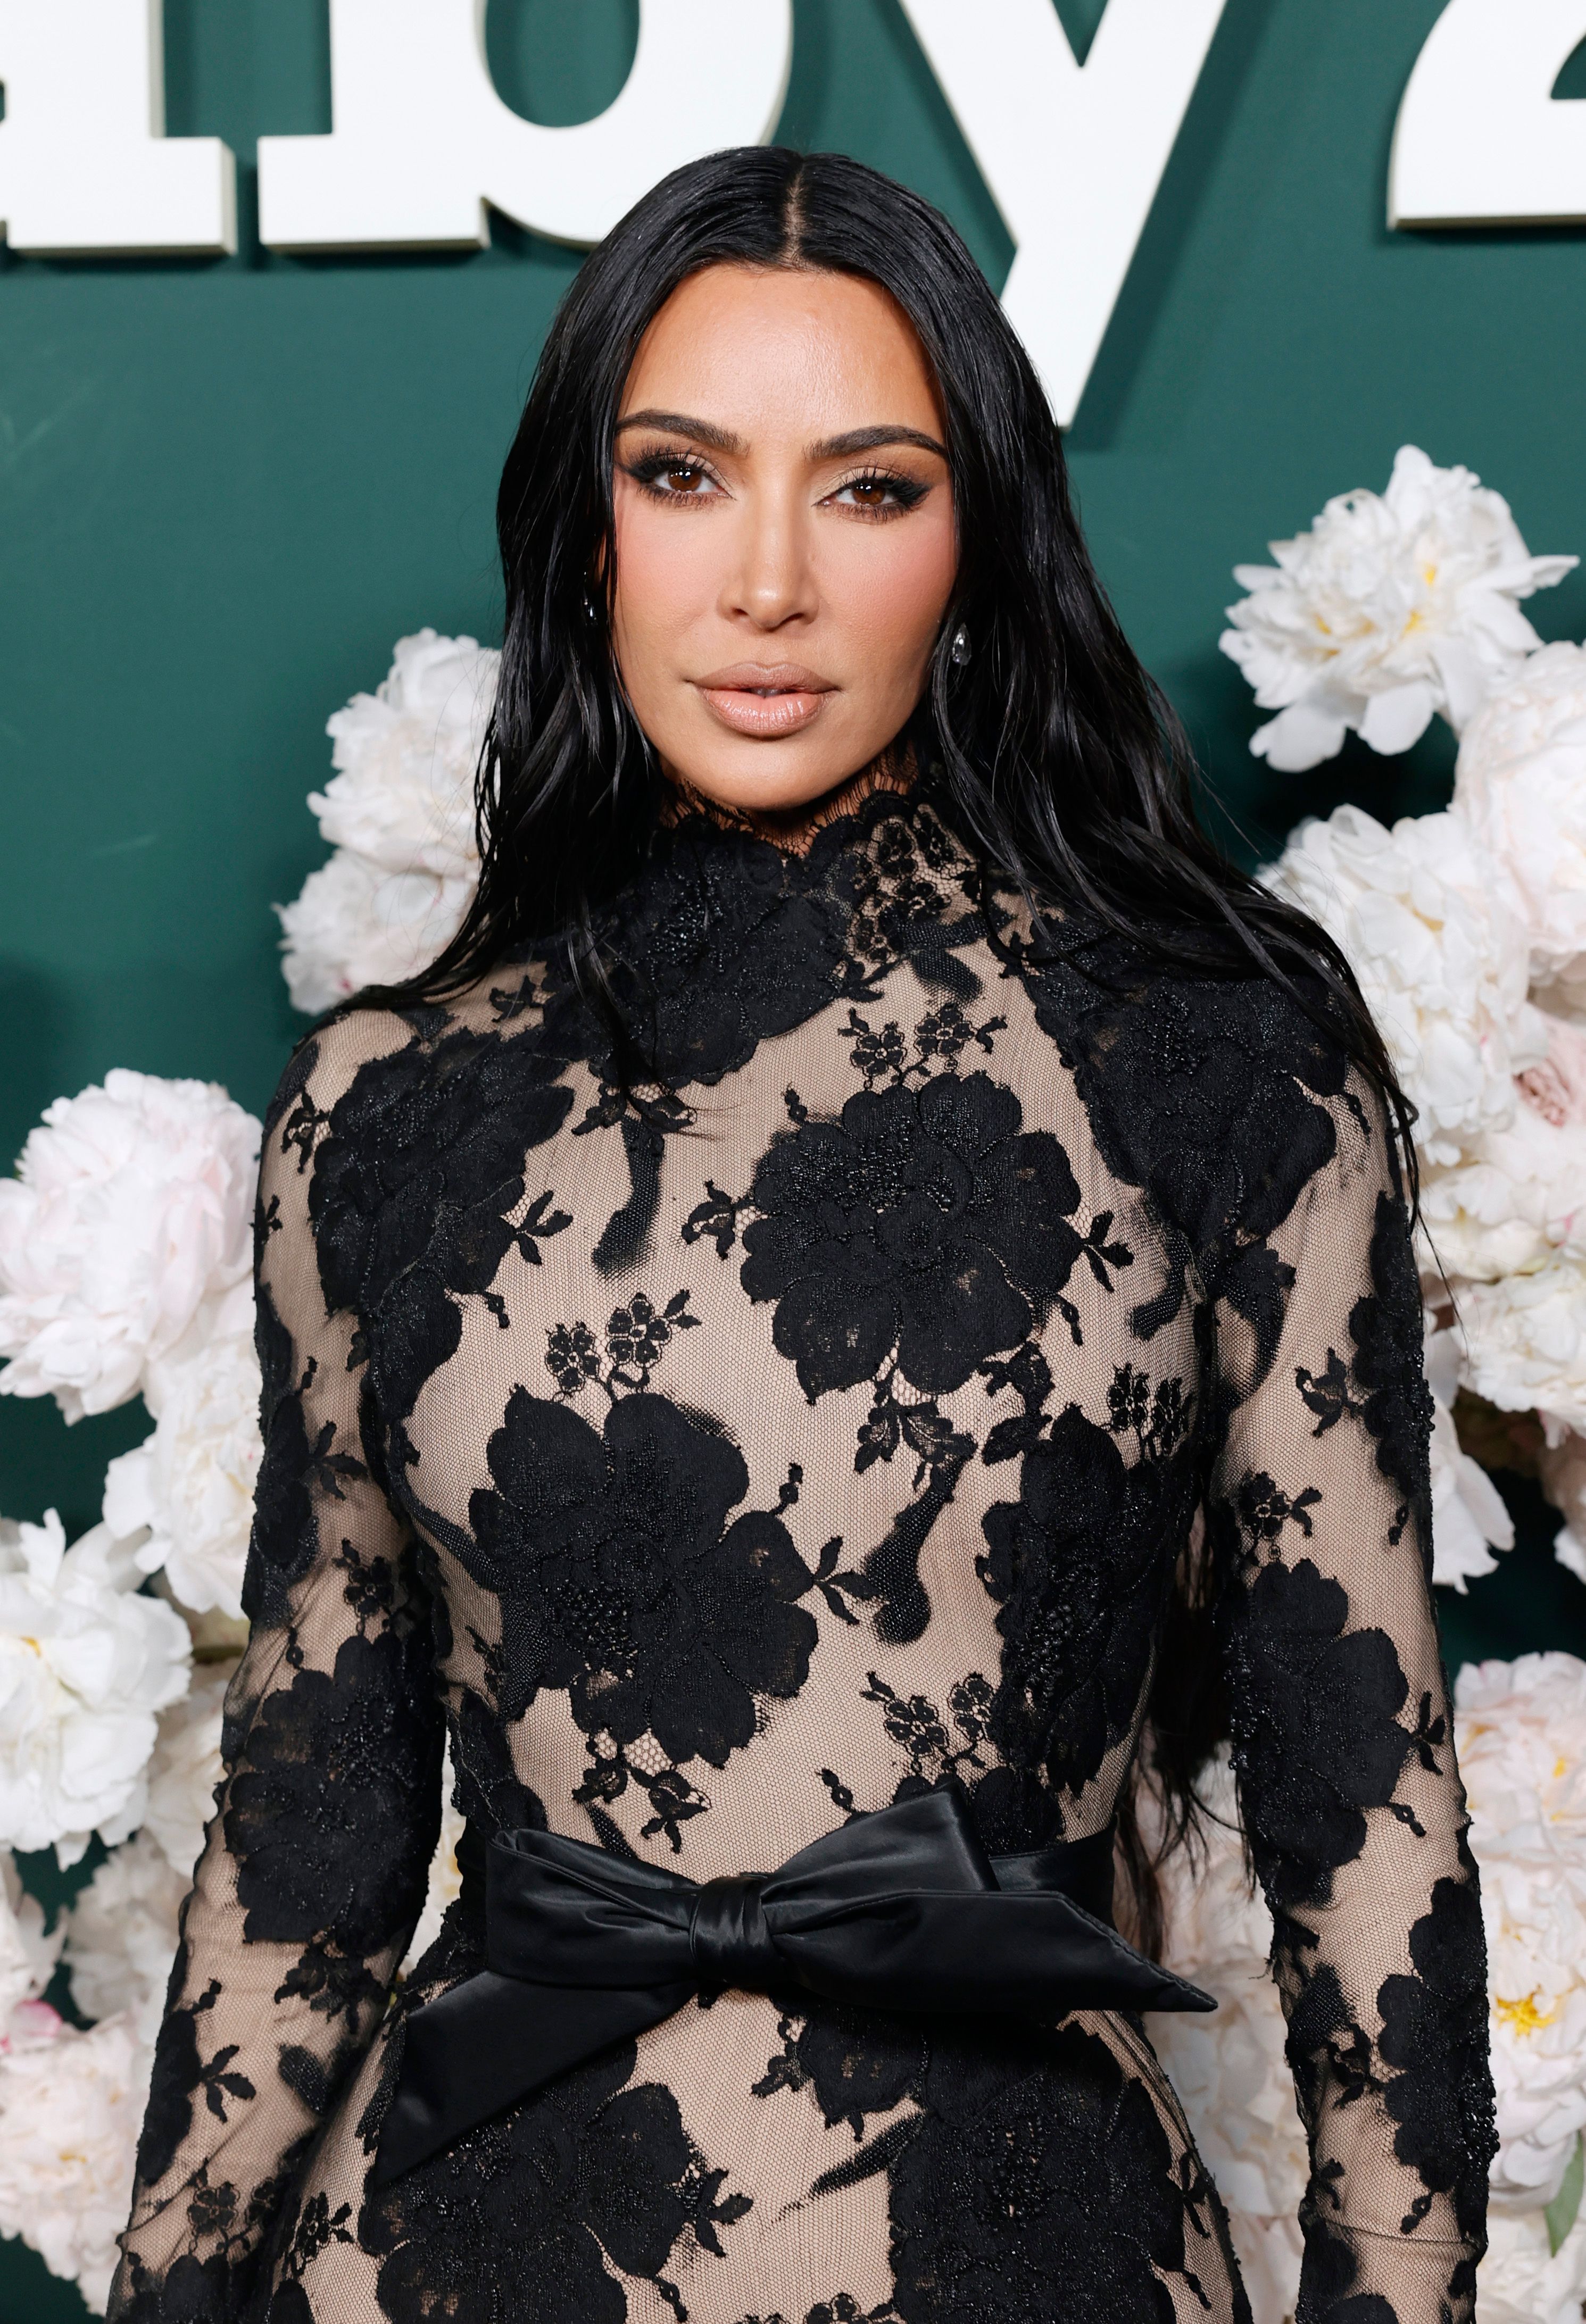 Kim reportedly, 'hasn't been this happy in a very long time' - the couple has been a rumored item for weeks